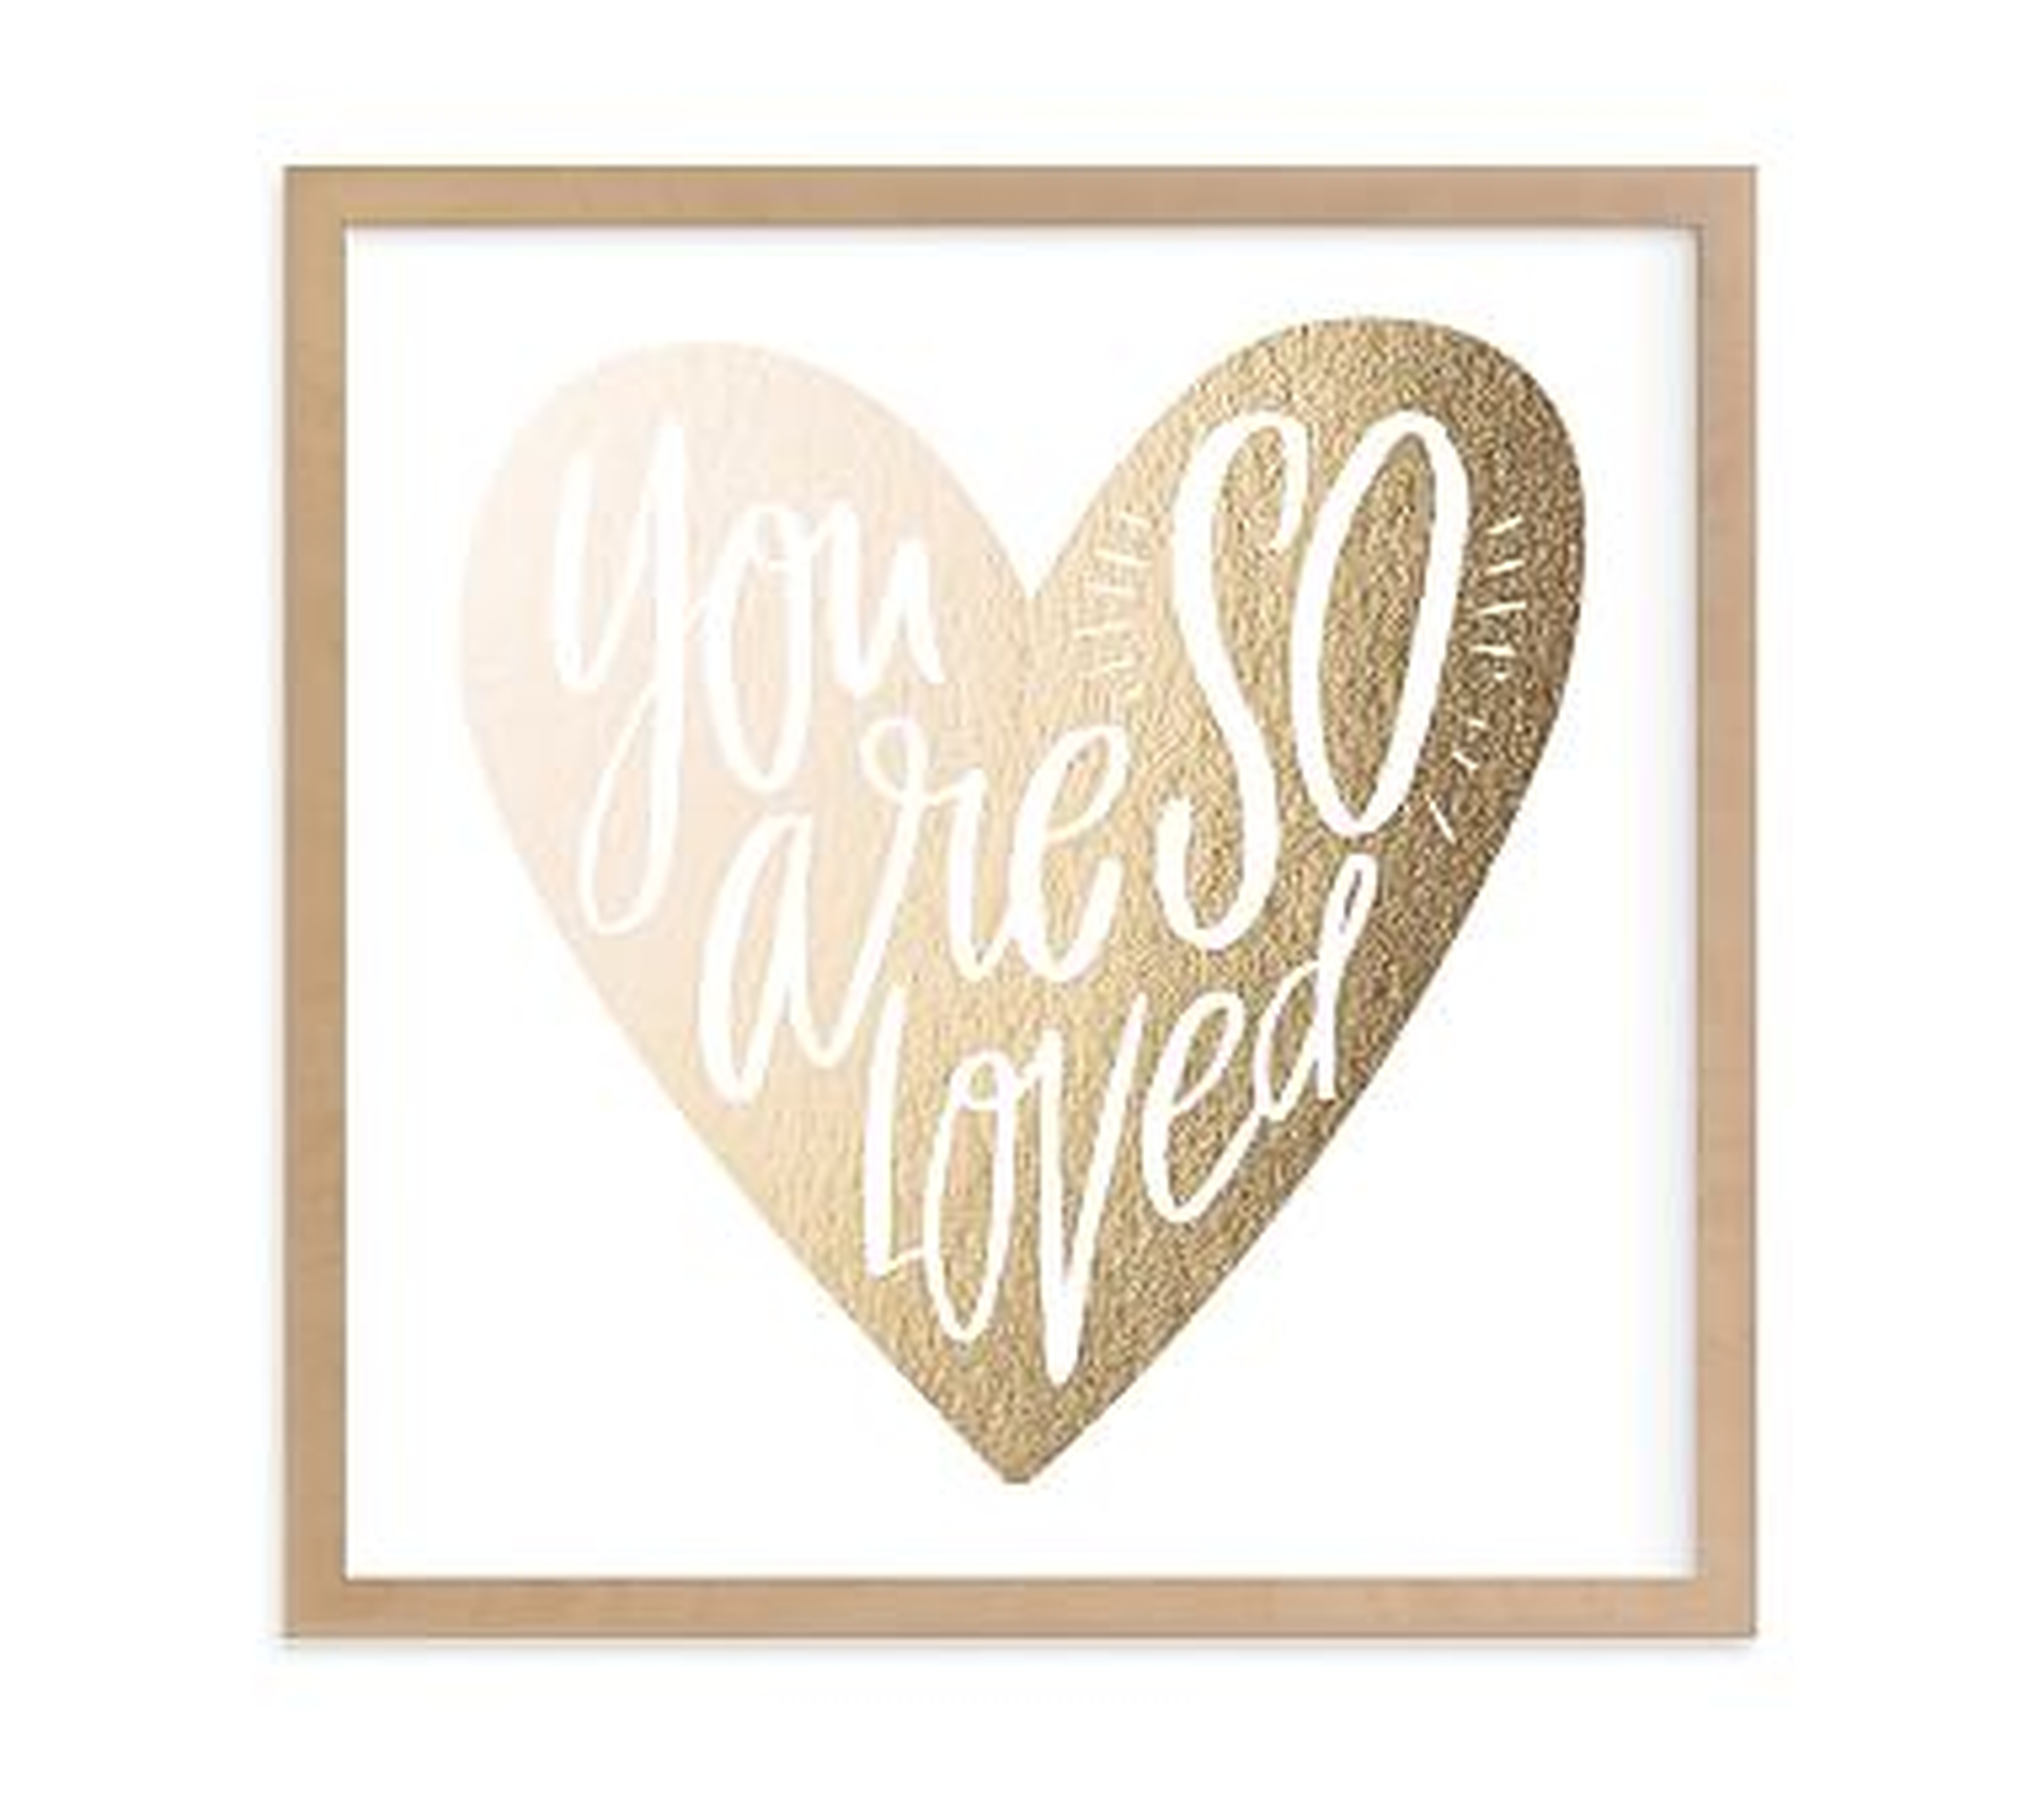 So Loved Heart Wall Art by Minted(R) 11x11, Natural - Pottery Barn Kids